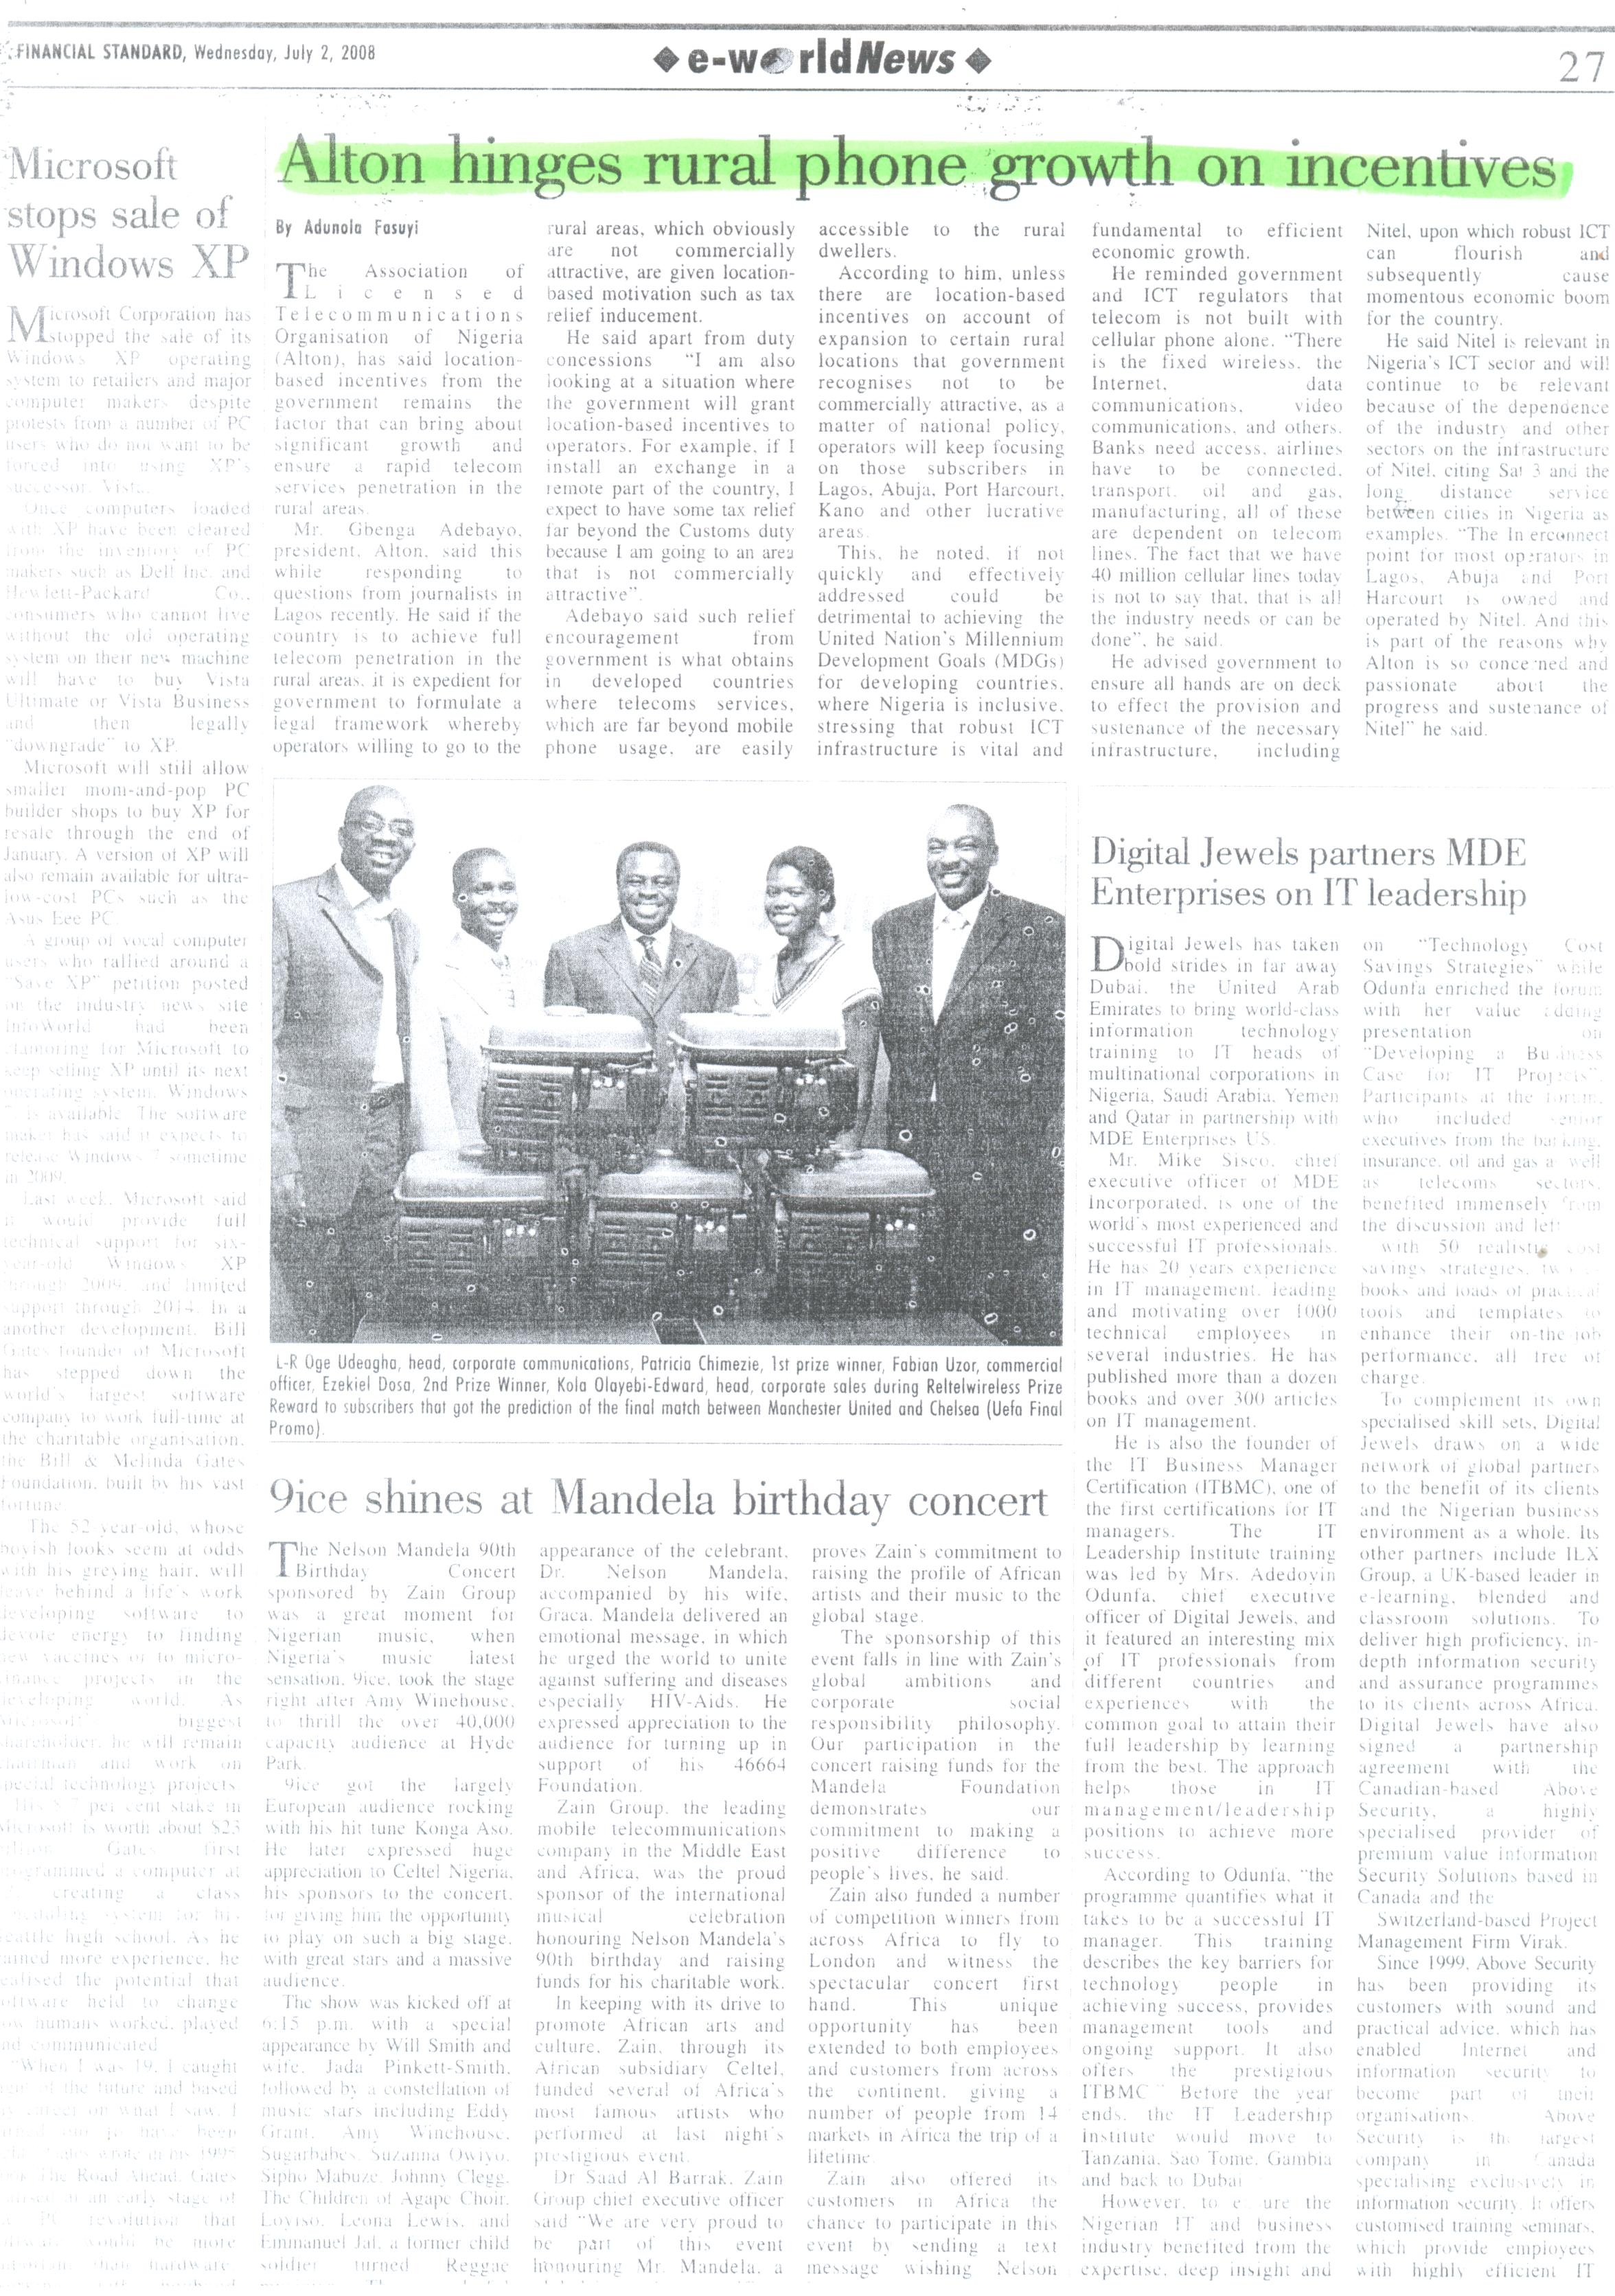 Publication on ALTON in the Financial Stardard of July 2, 2008